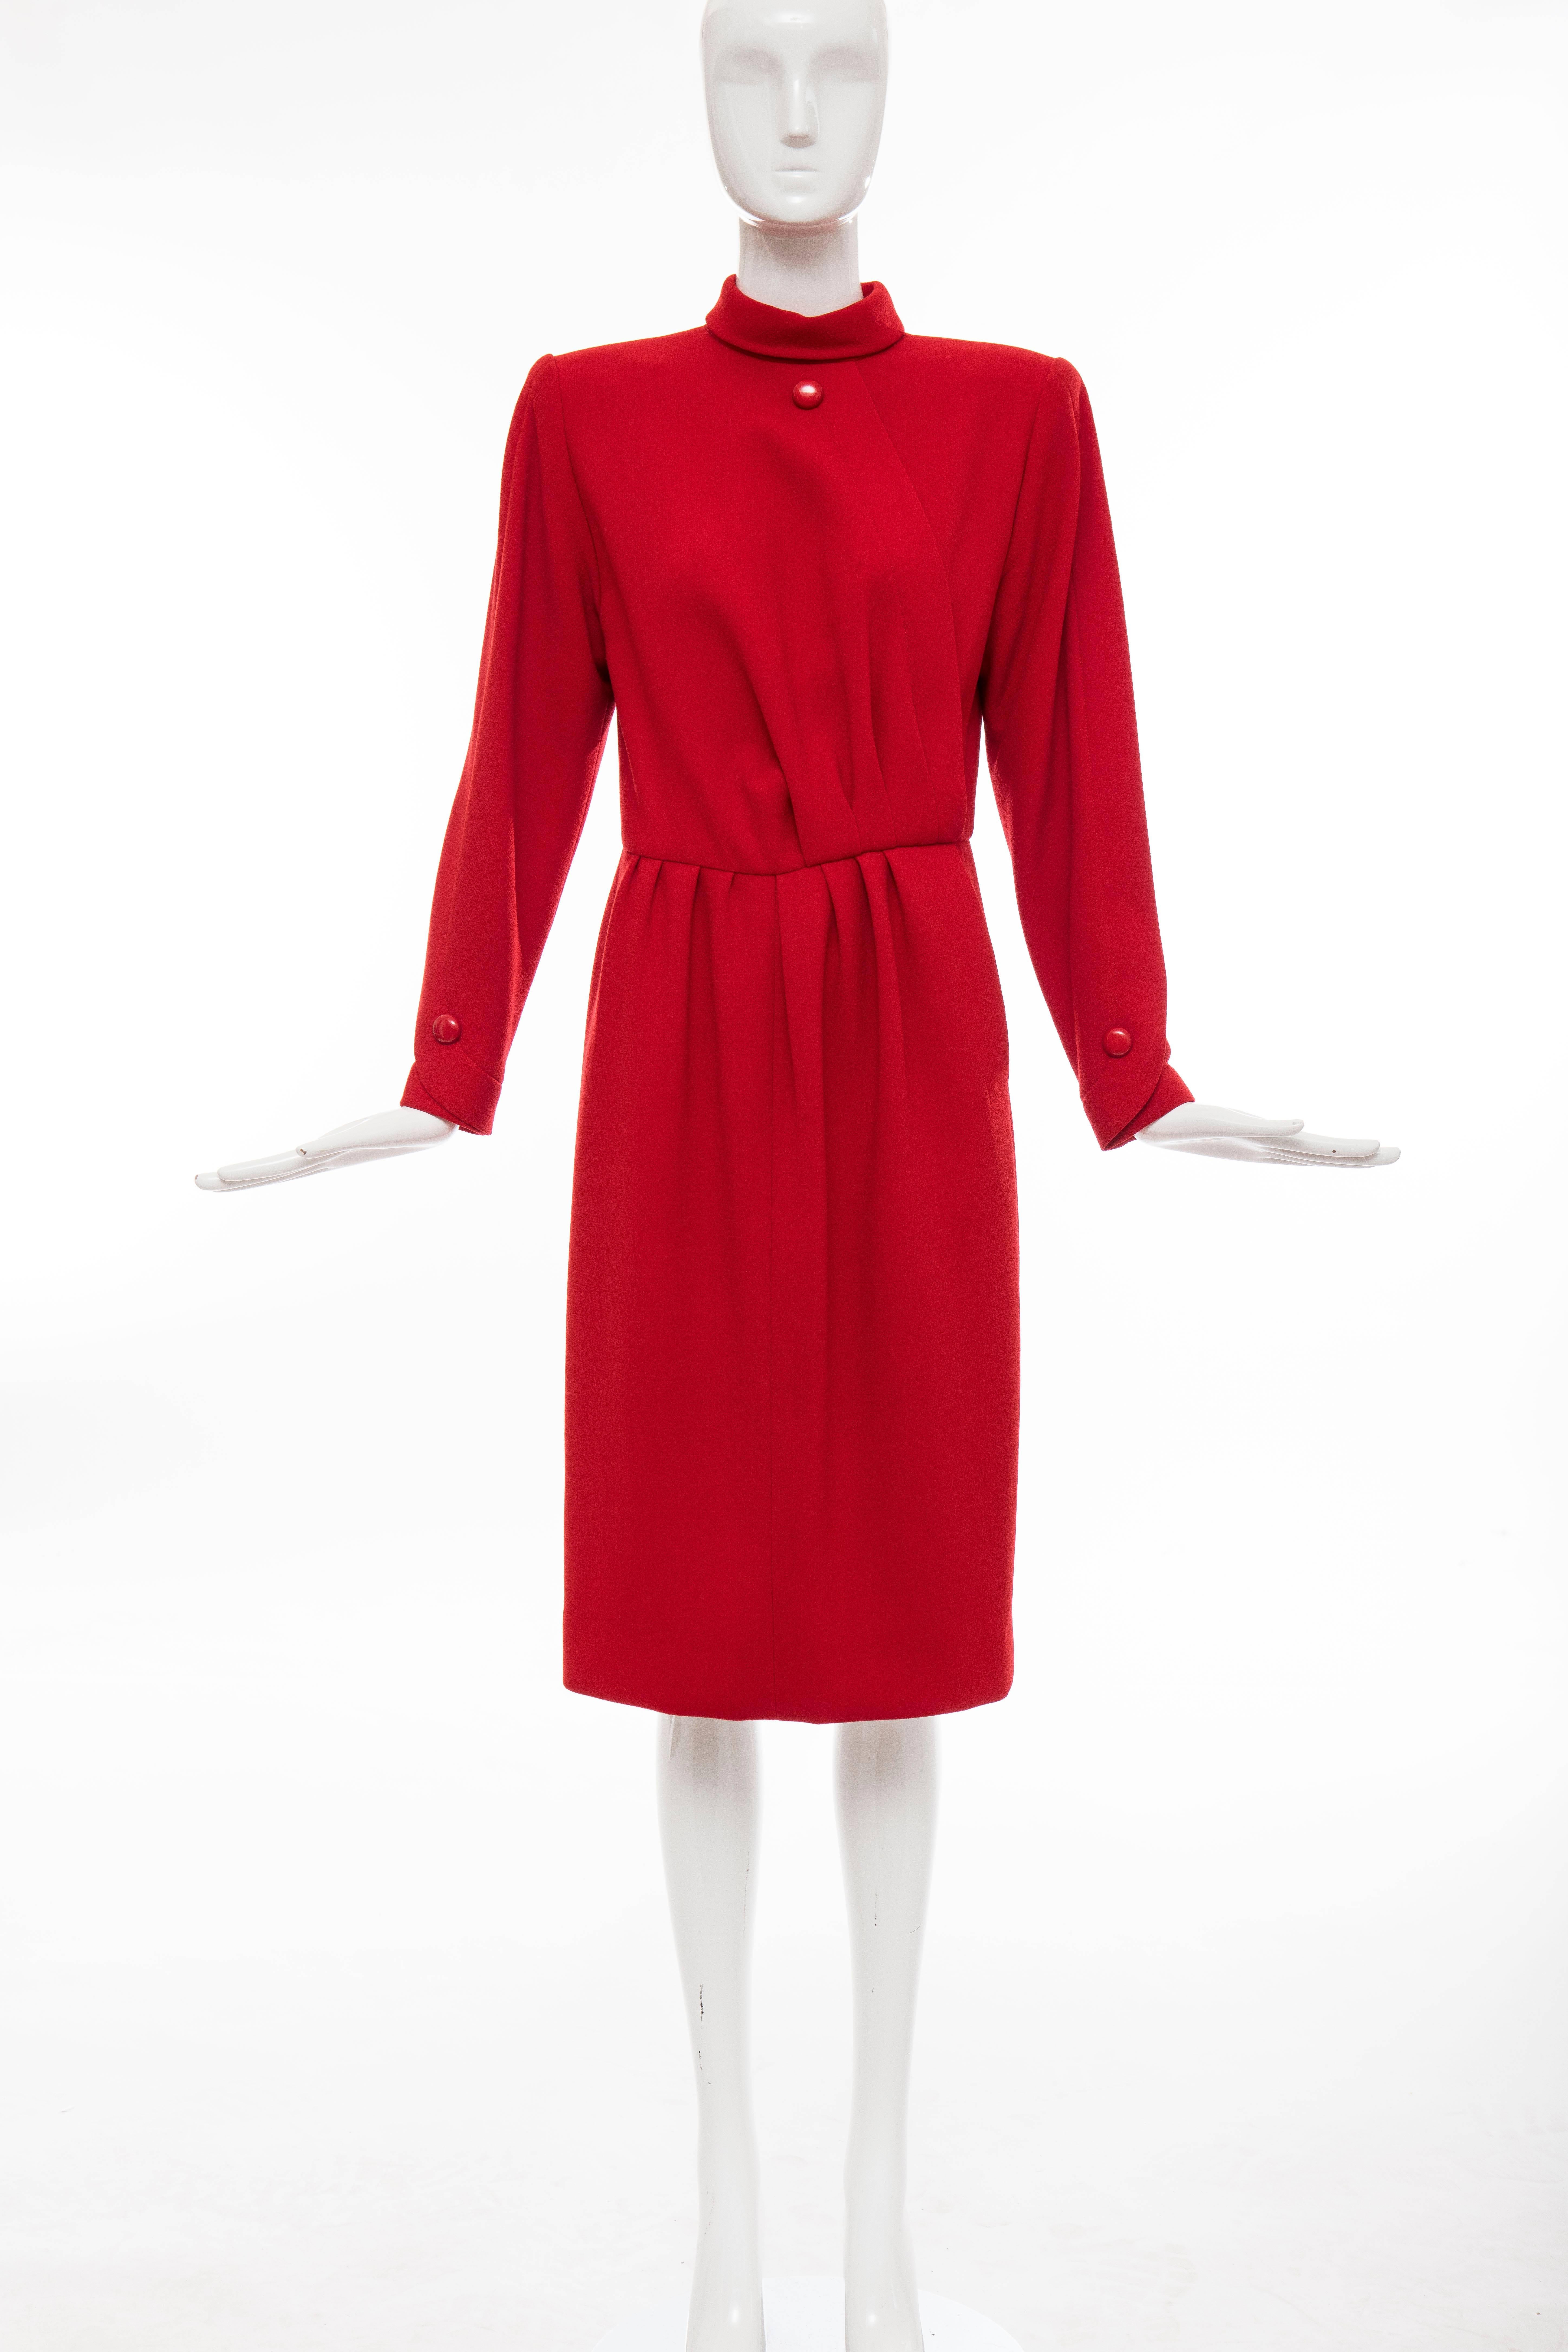 Nina Ricci Haute Couture, Circa 1980's red wool crepe dress with pleated bodice and skirt, one front pocket, back zip and hook-and-eye closure and fully lined in silk.

No Size Label

Bust 34, Waist 28, Hips 38, Sleeve 23, Length 43
